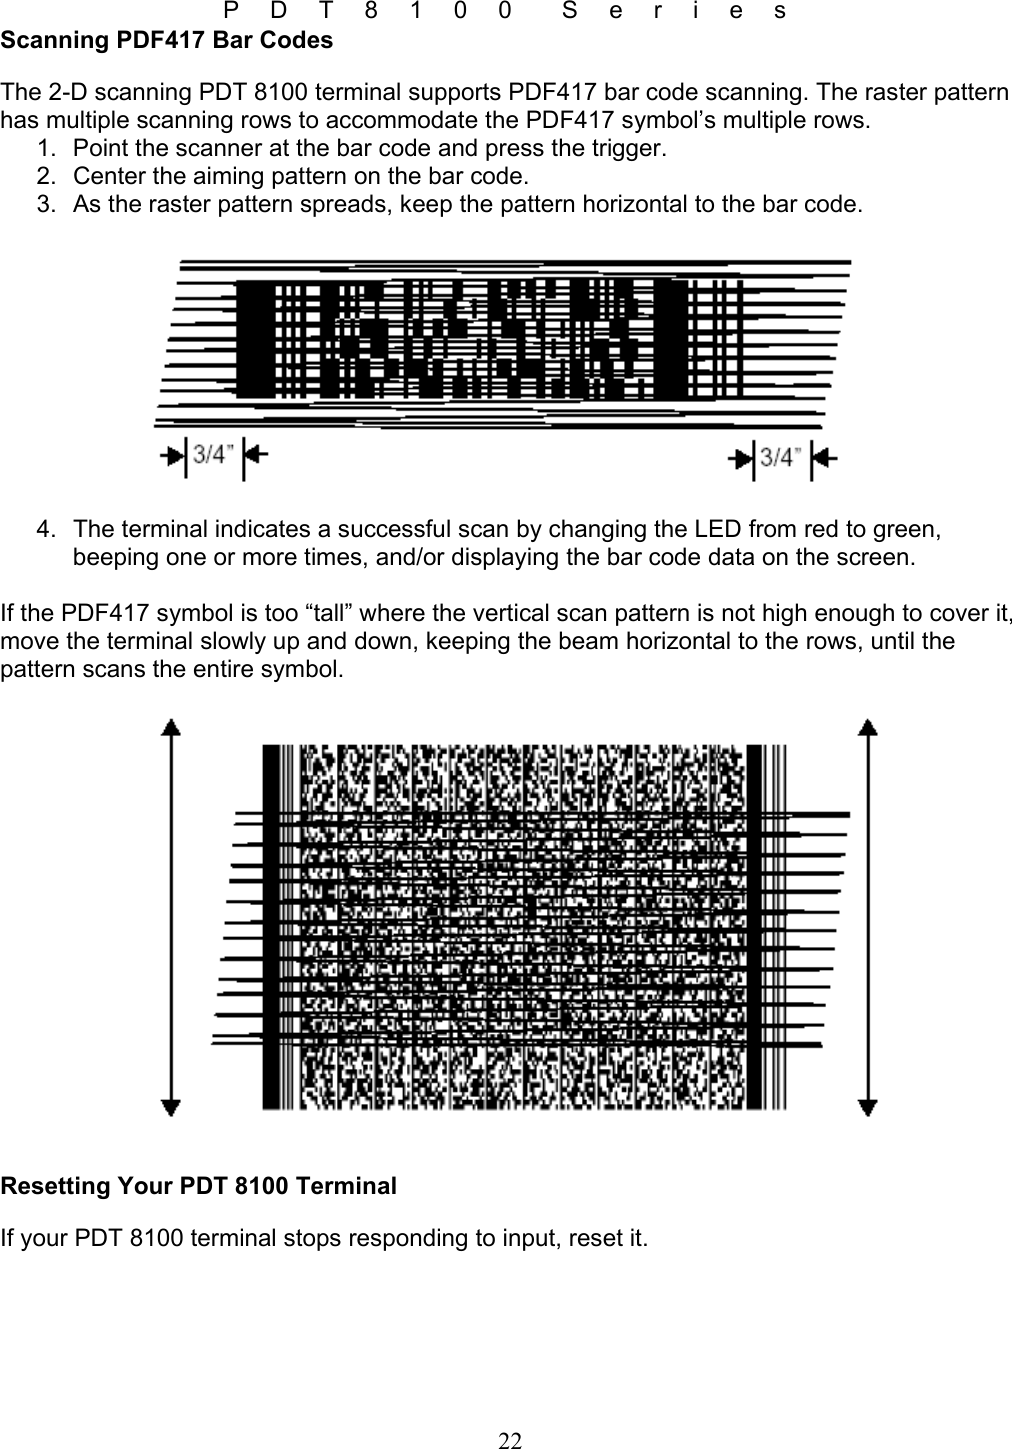 P D T 8 1 0 0  S e r i e s 22 Scanning PDF417 Bar Codes The 2-D scanning PDT 8100 terminal supports PDF417 bar code scanning. The raster pattern has multiple scanning rows to accommodate the PDF417 symbol’s multiple rows. 1.  Point the scanner at the bar code and press the trigger. 2.  Center the aiming pattern on the bar code. 3.  As the raster pattern spreads, keep the pattern horizontal to the bar code.    4.  The terminal indicates a successful scan by changing the LED from red to green, beeping one or more times, and/or displaying the bar code data on the screen.  If the PDF417 symbol is too “tall” where the vertical scan pattern is not high enough to cover it, move the terminal slowly up and down, keeping the beam horizontal to the rows, until the pattern scans the entire symbol.    Resetting Your PDT 8100 Terminal If your PDT 8100 terminal stops responding to input, reset it. 